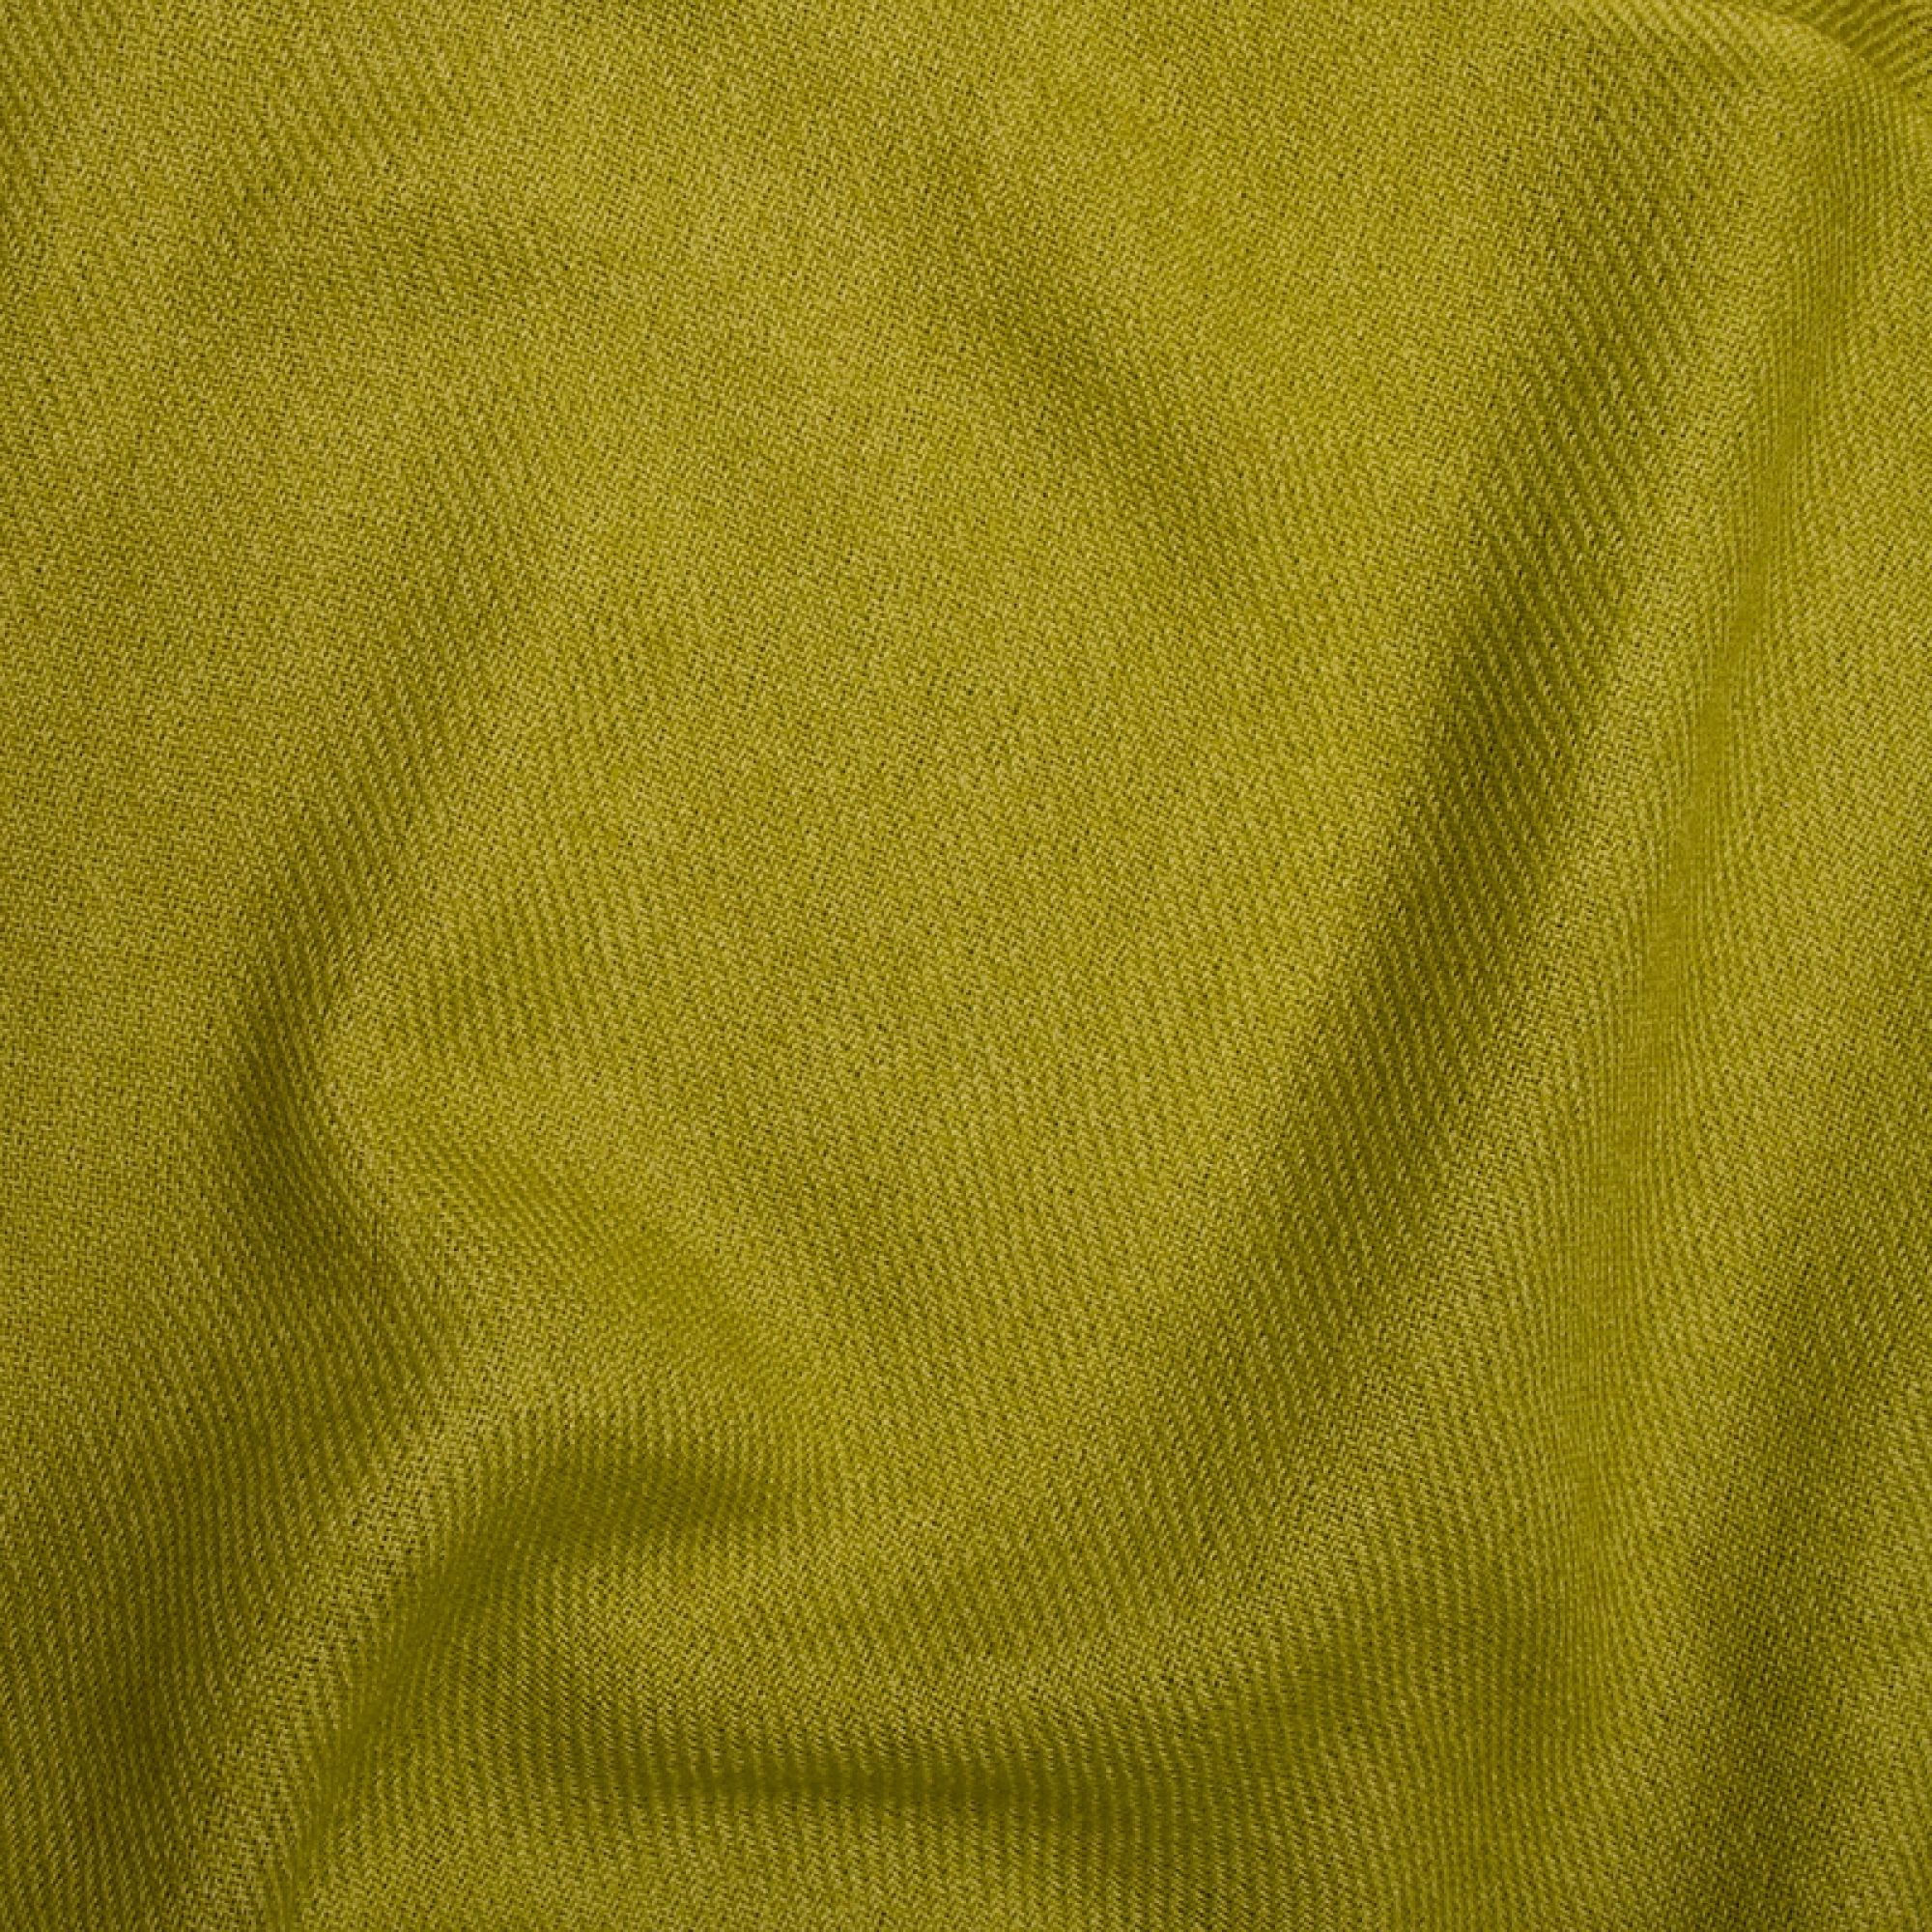 Cashmere accessories blanket toodoo plain xl 240 x 260 lime punch 240 x 260 cm